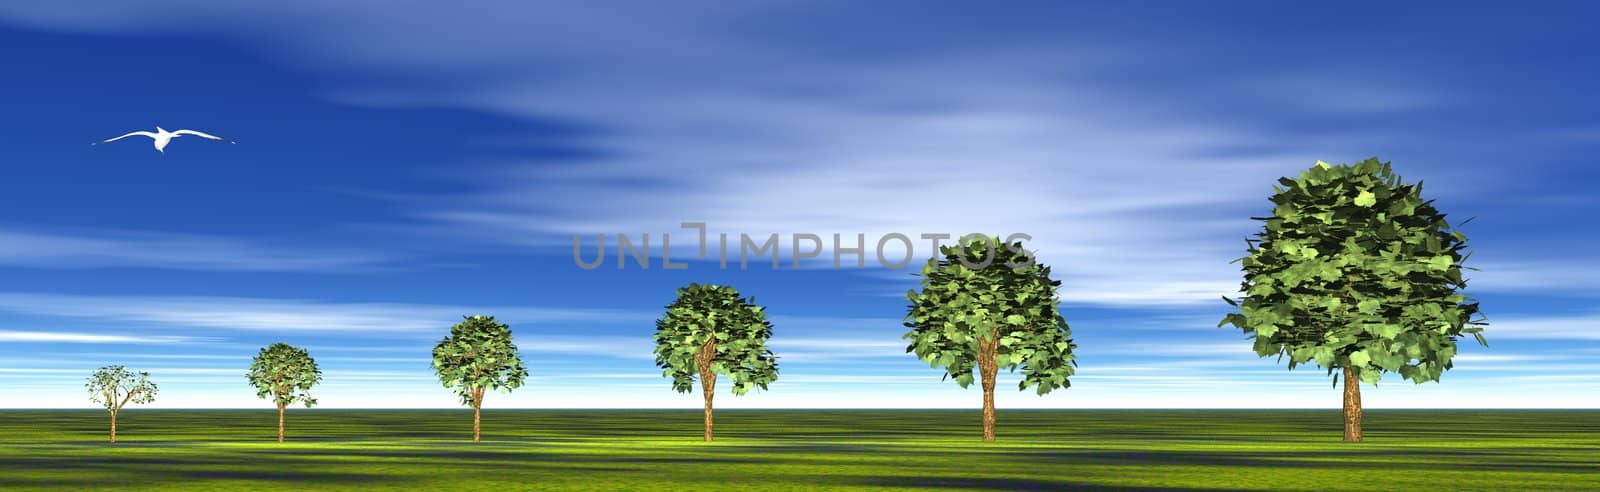 Small to big trees in a nature background with blue sky, green grass and a flying bird